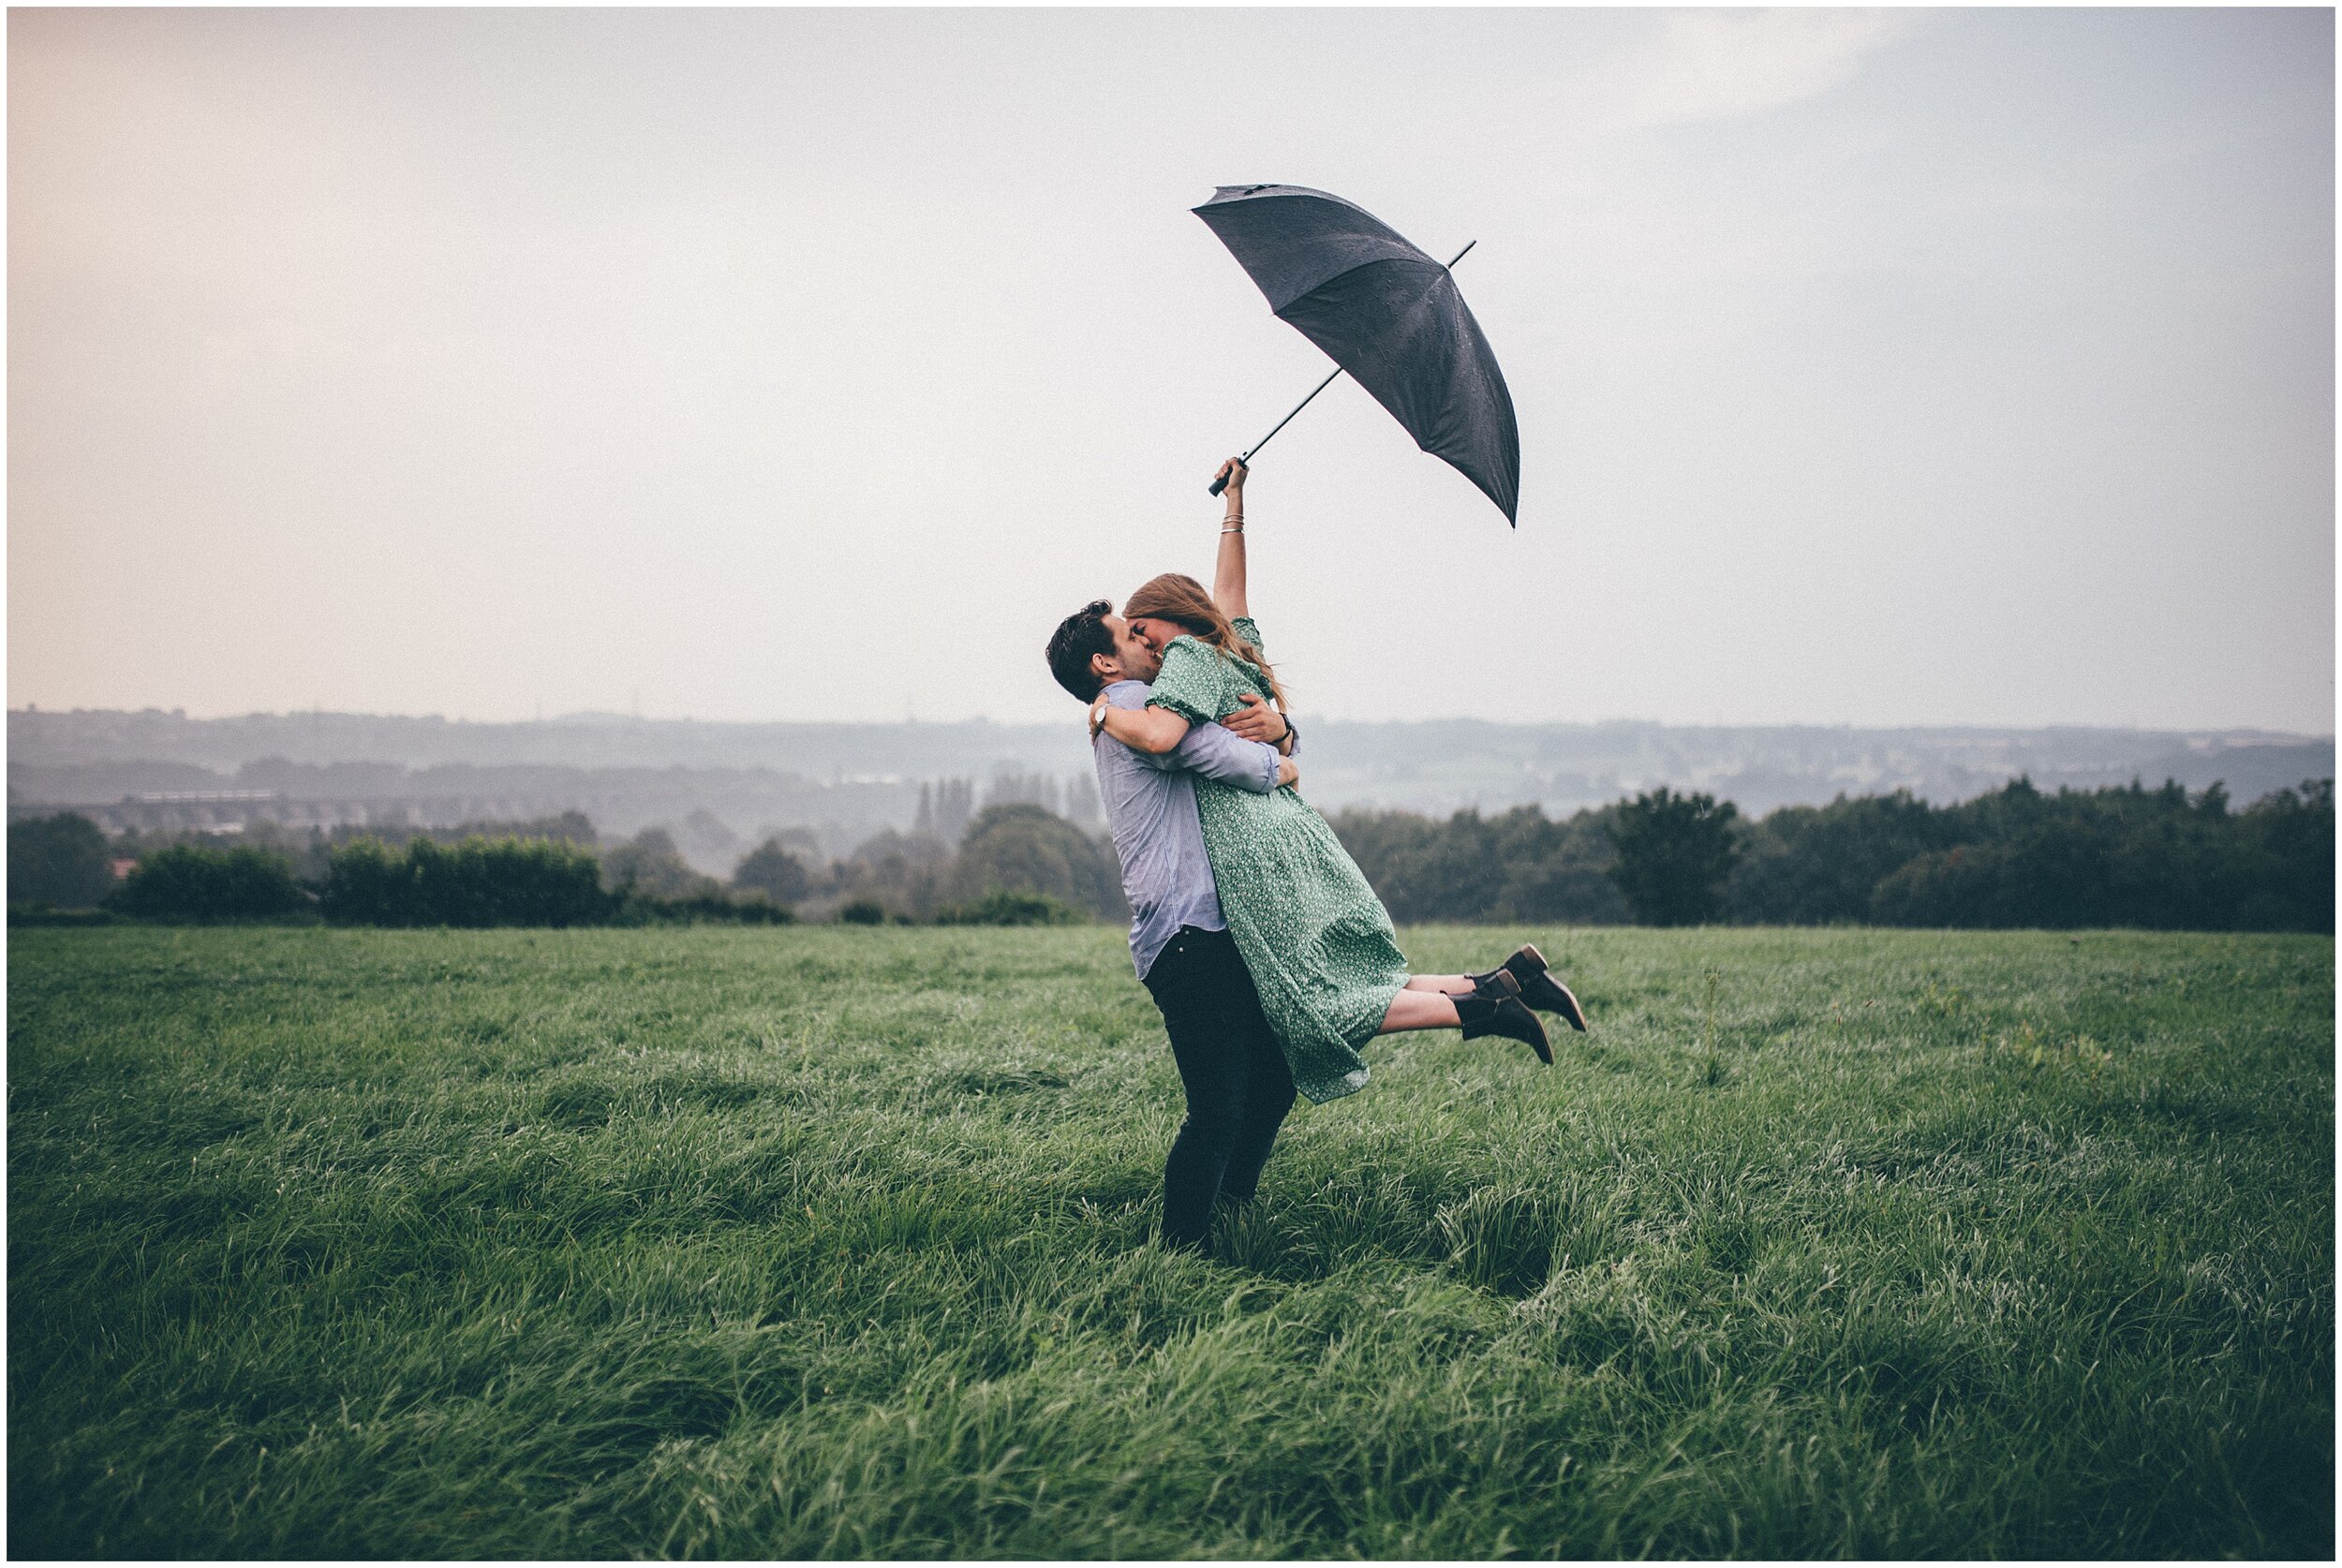 Couple with black umbrella as boyfriend lifts up his girlfriend.